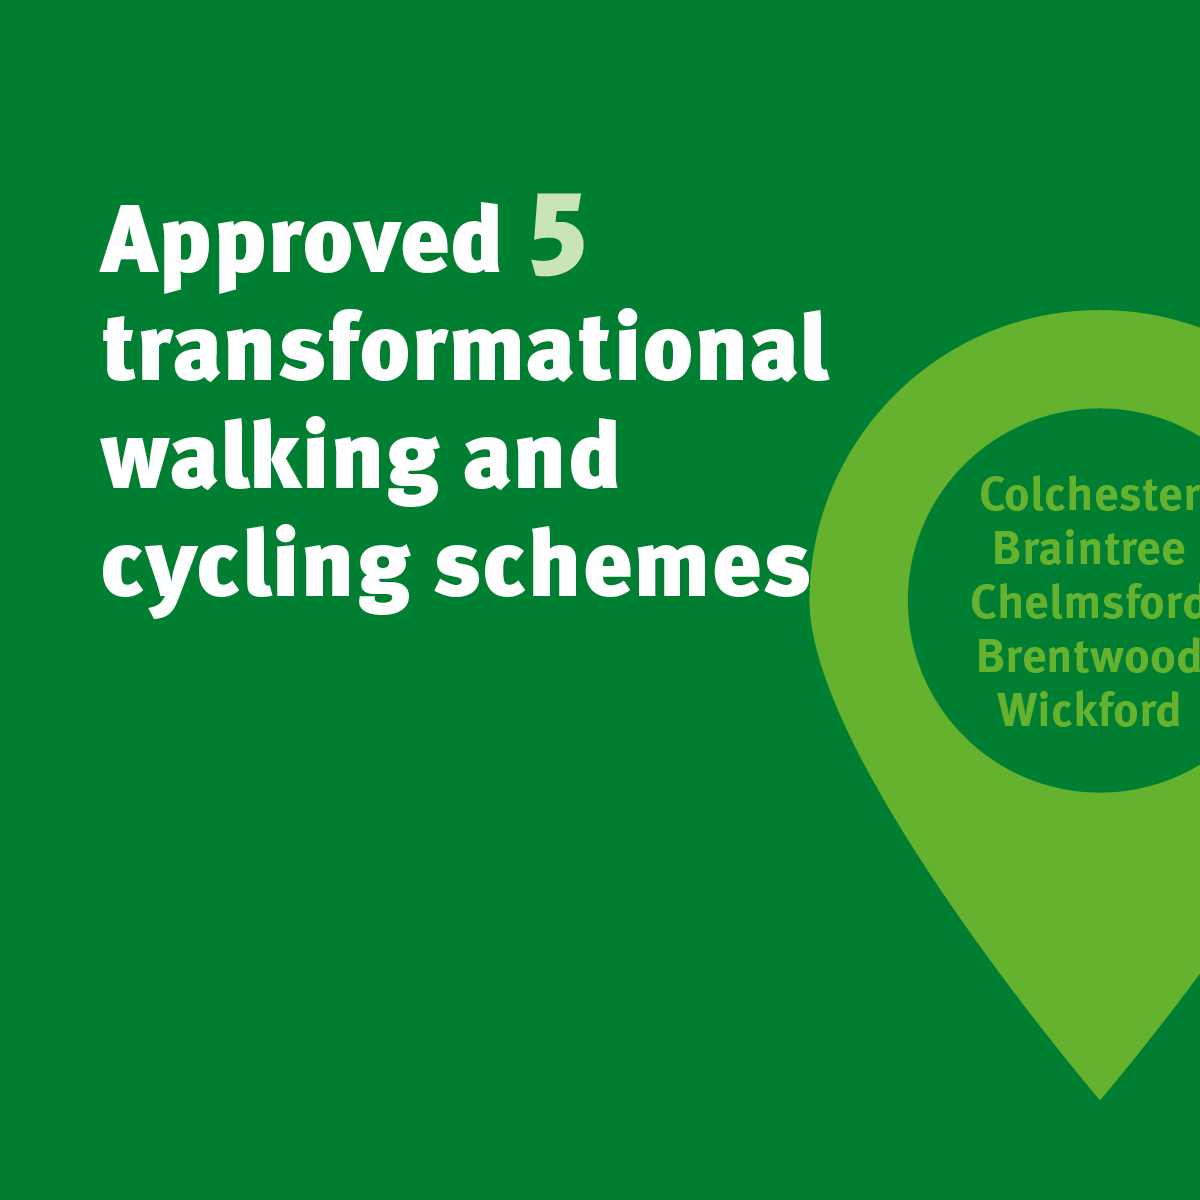 Approved 5 transformational walking and cycling schemes